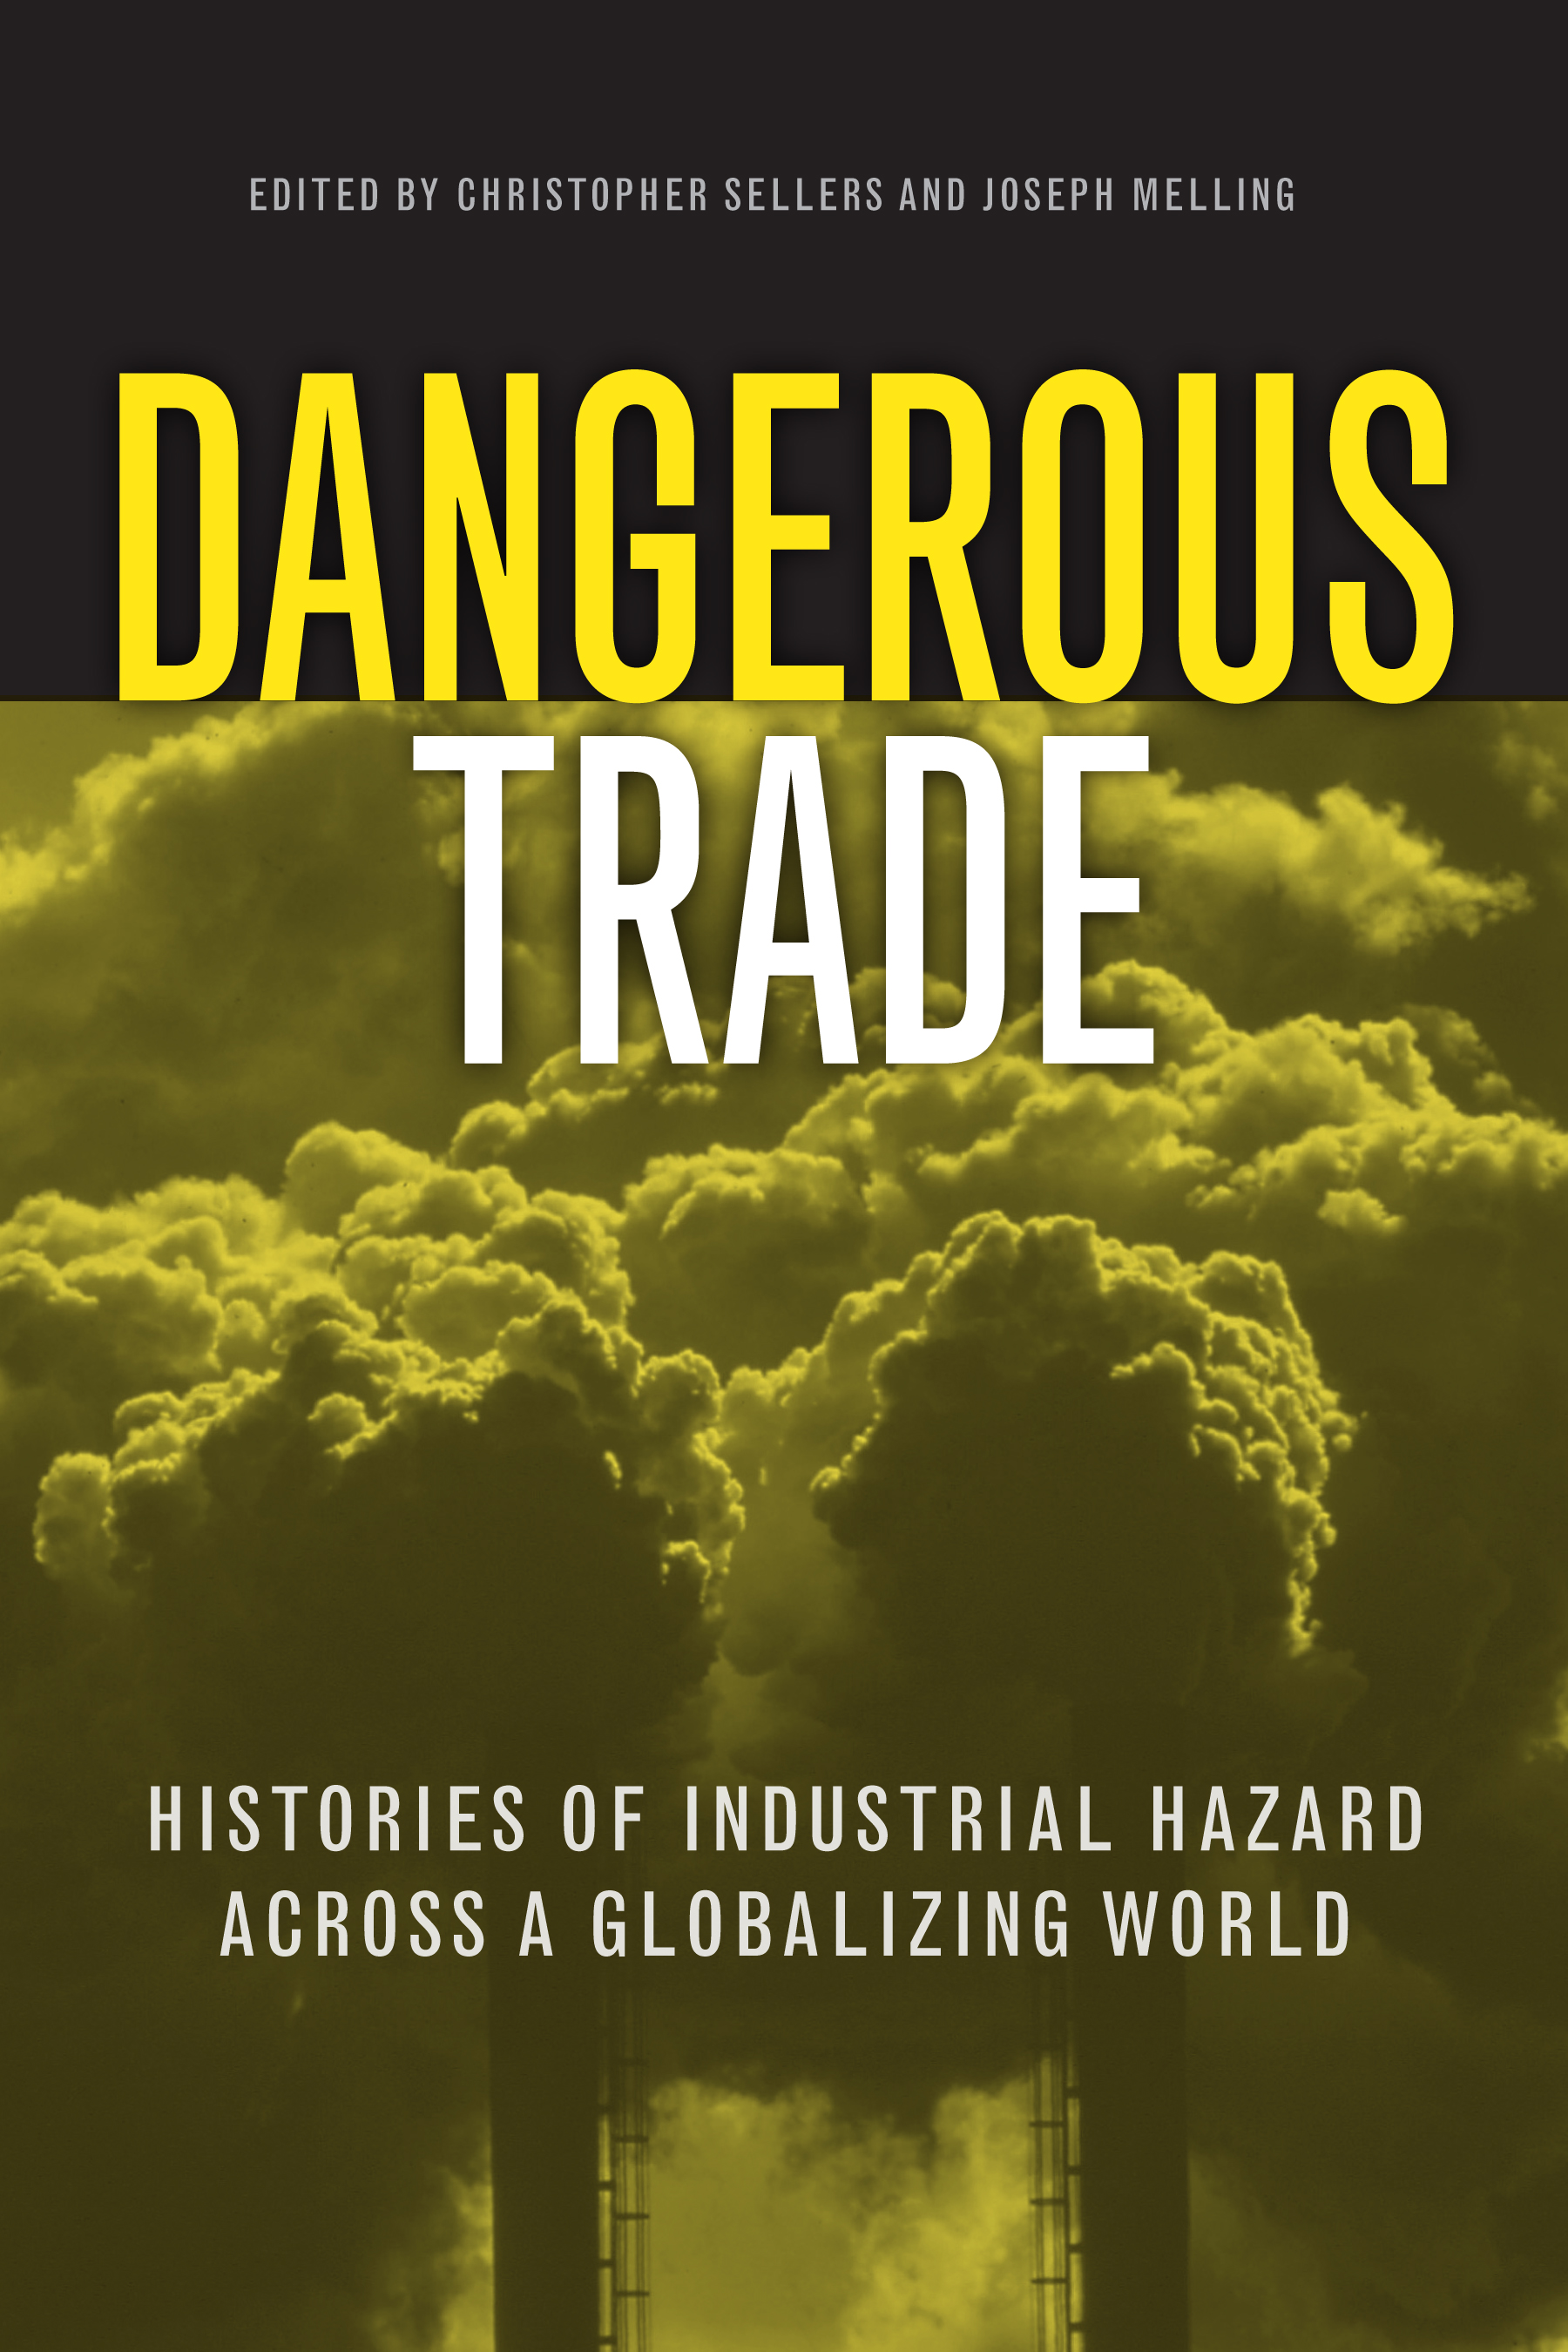 Dangerous Trade: Histories of Industrial Hazard across a Globalizing World Christopher Sellers and Joseph Melling